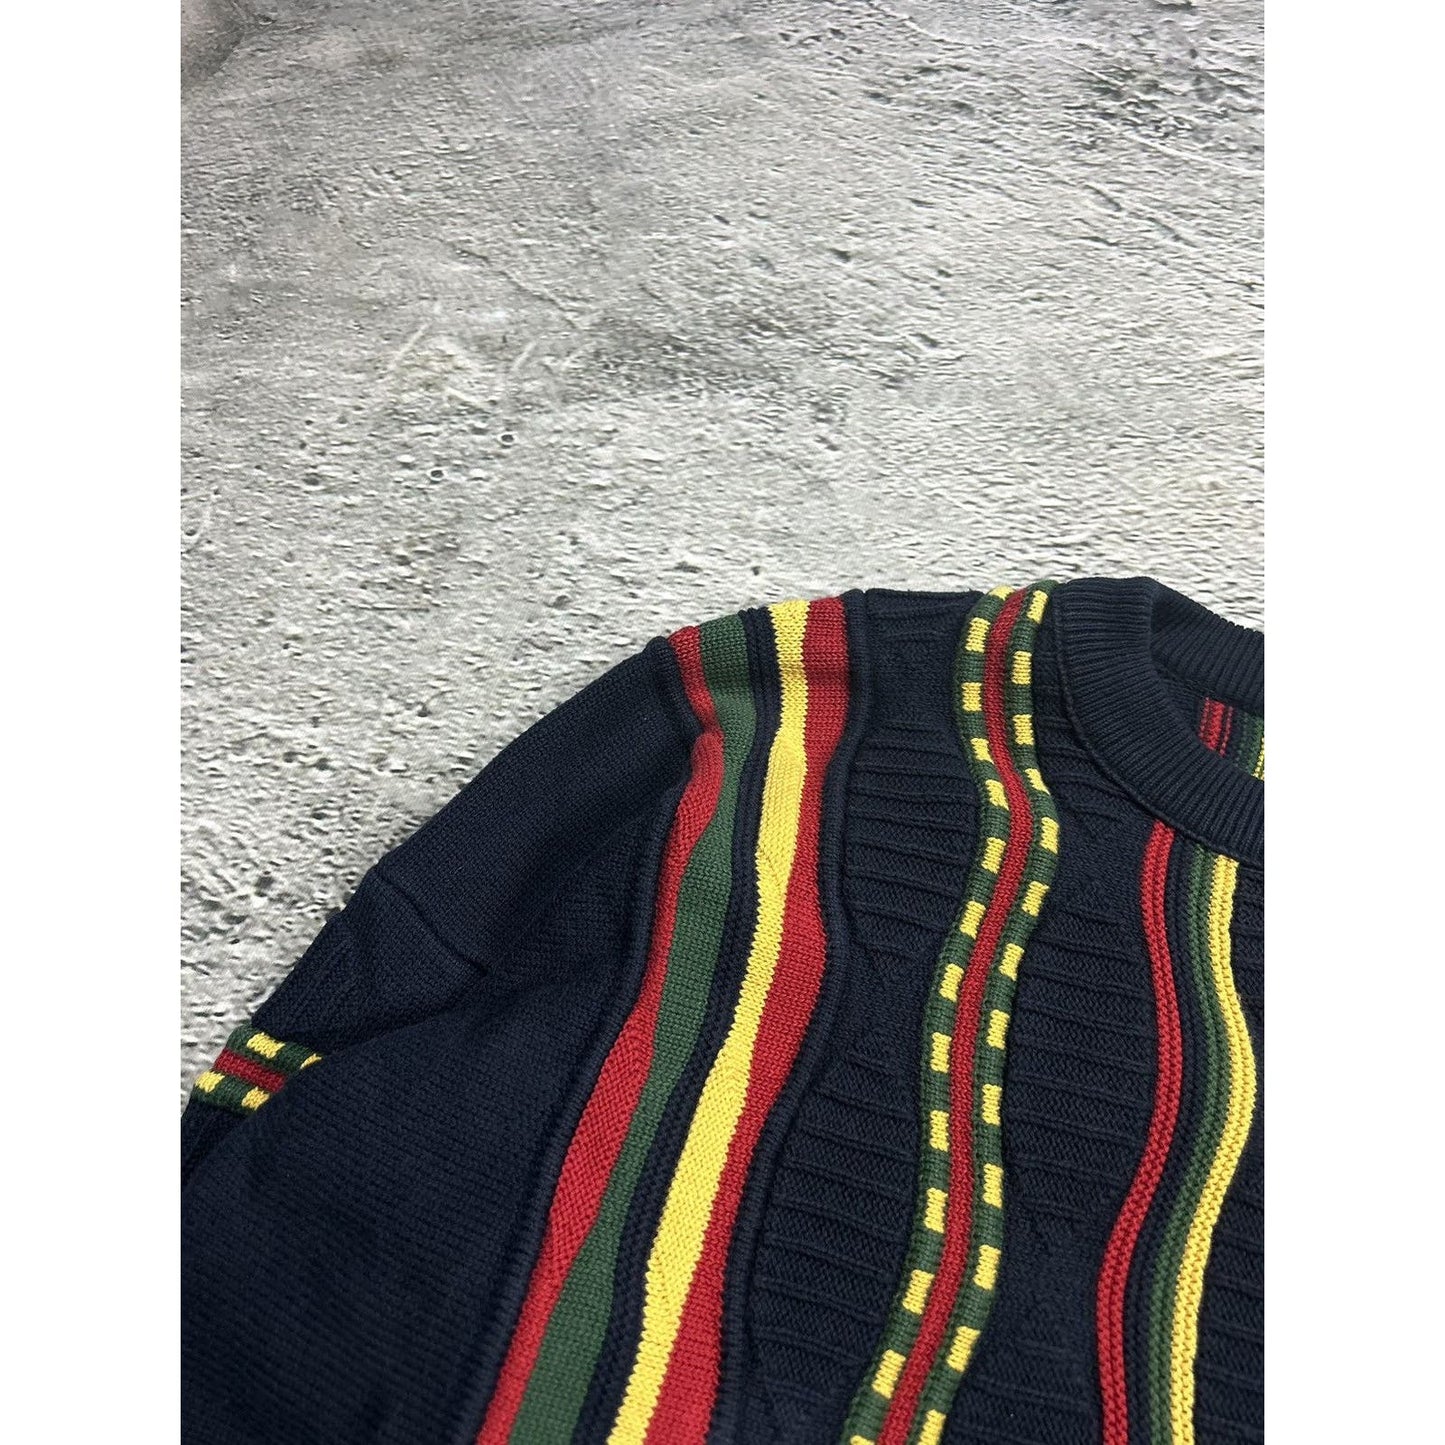 Lacoste sweater multicolor vintage coogi style cable knit